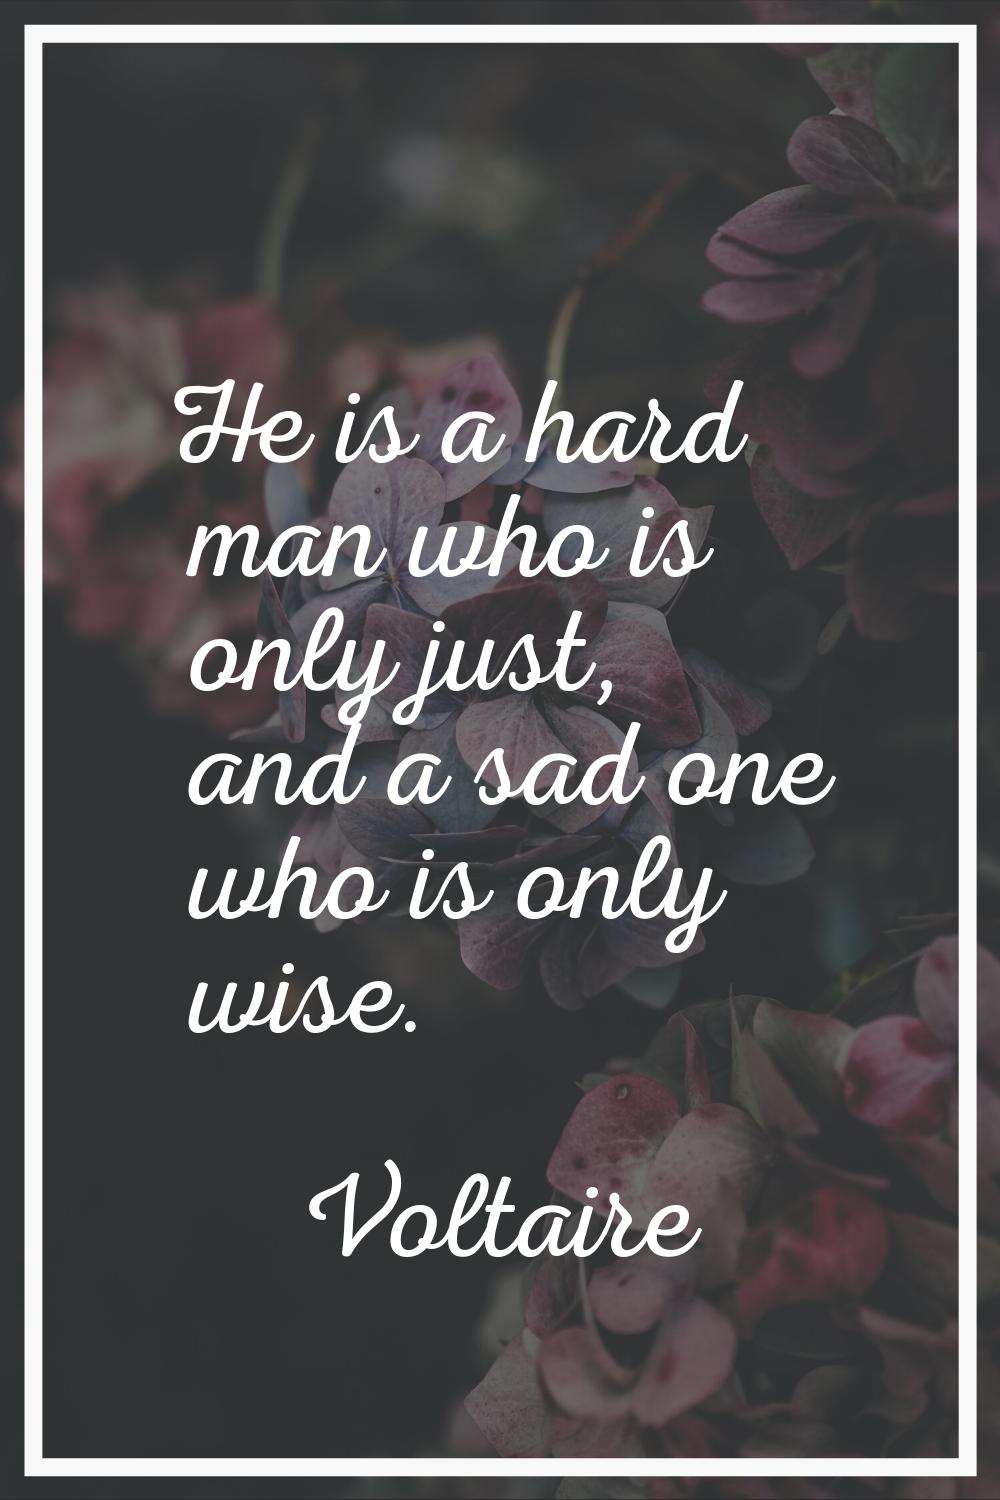 He is a hard man who is only just, and a sad one who is only wise.